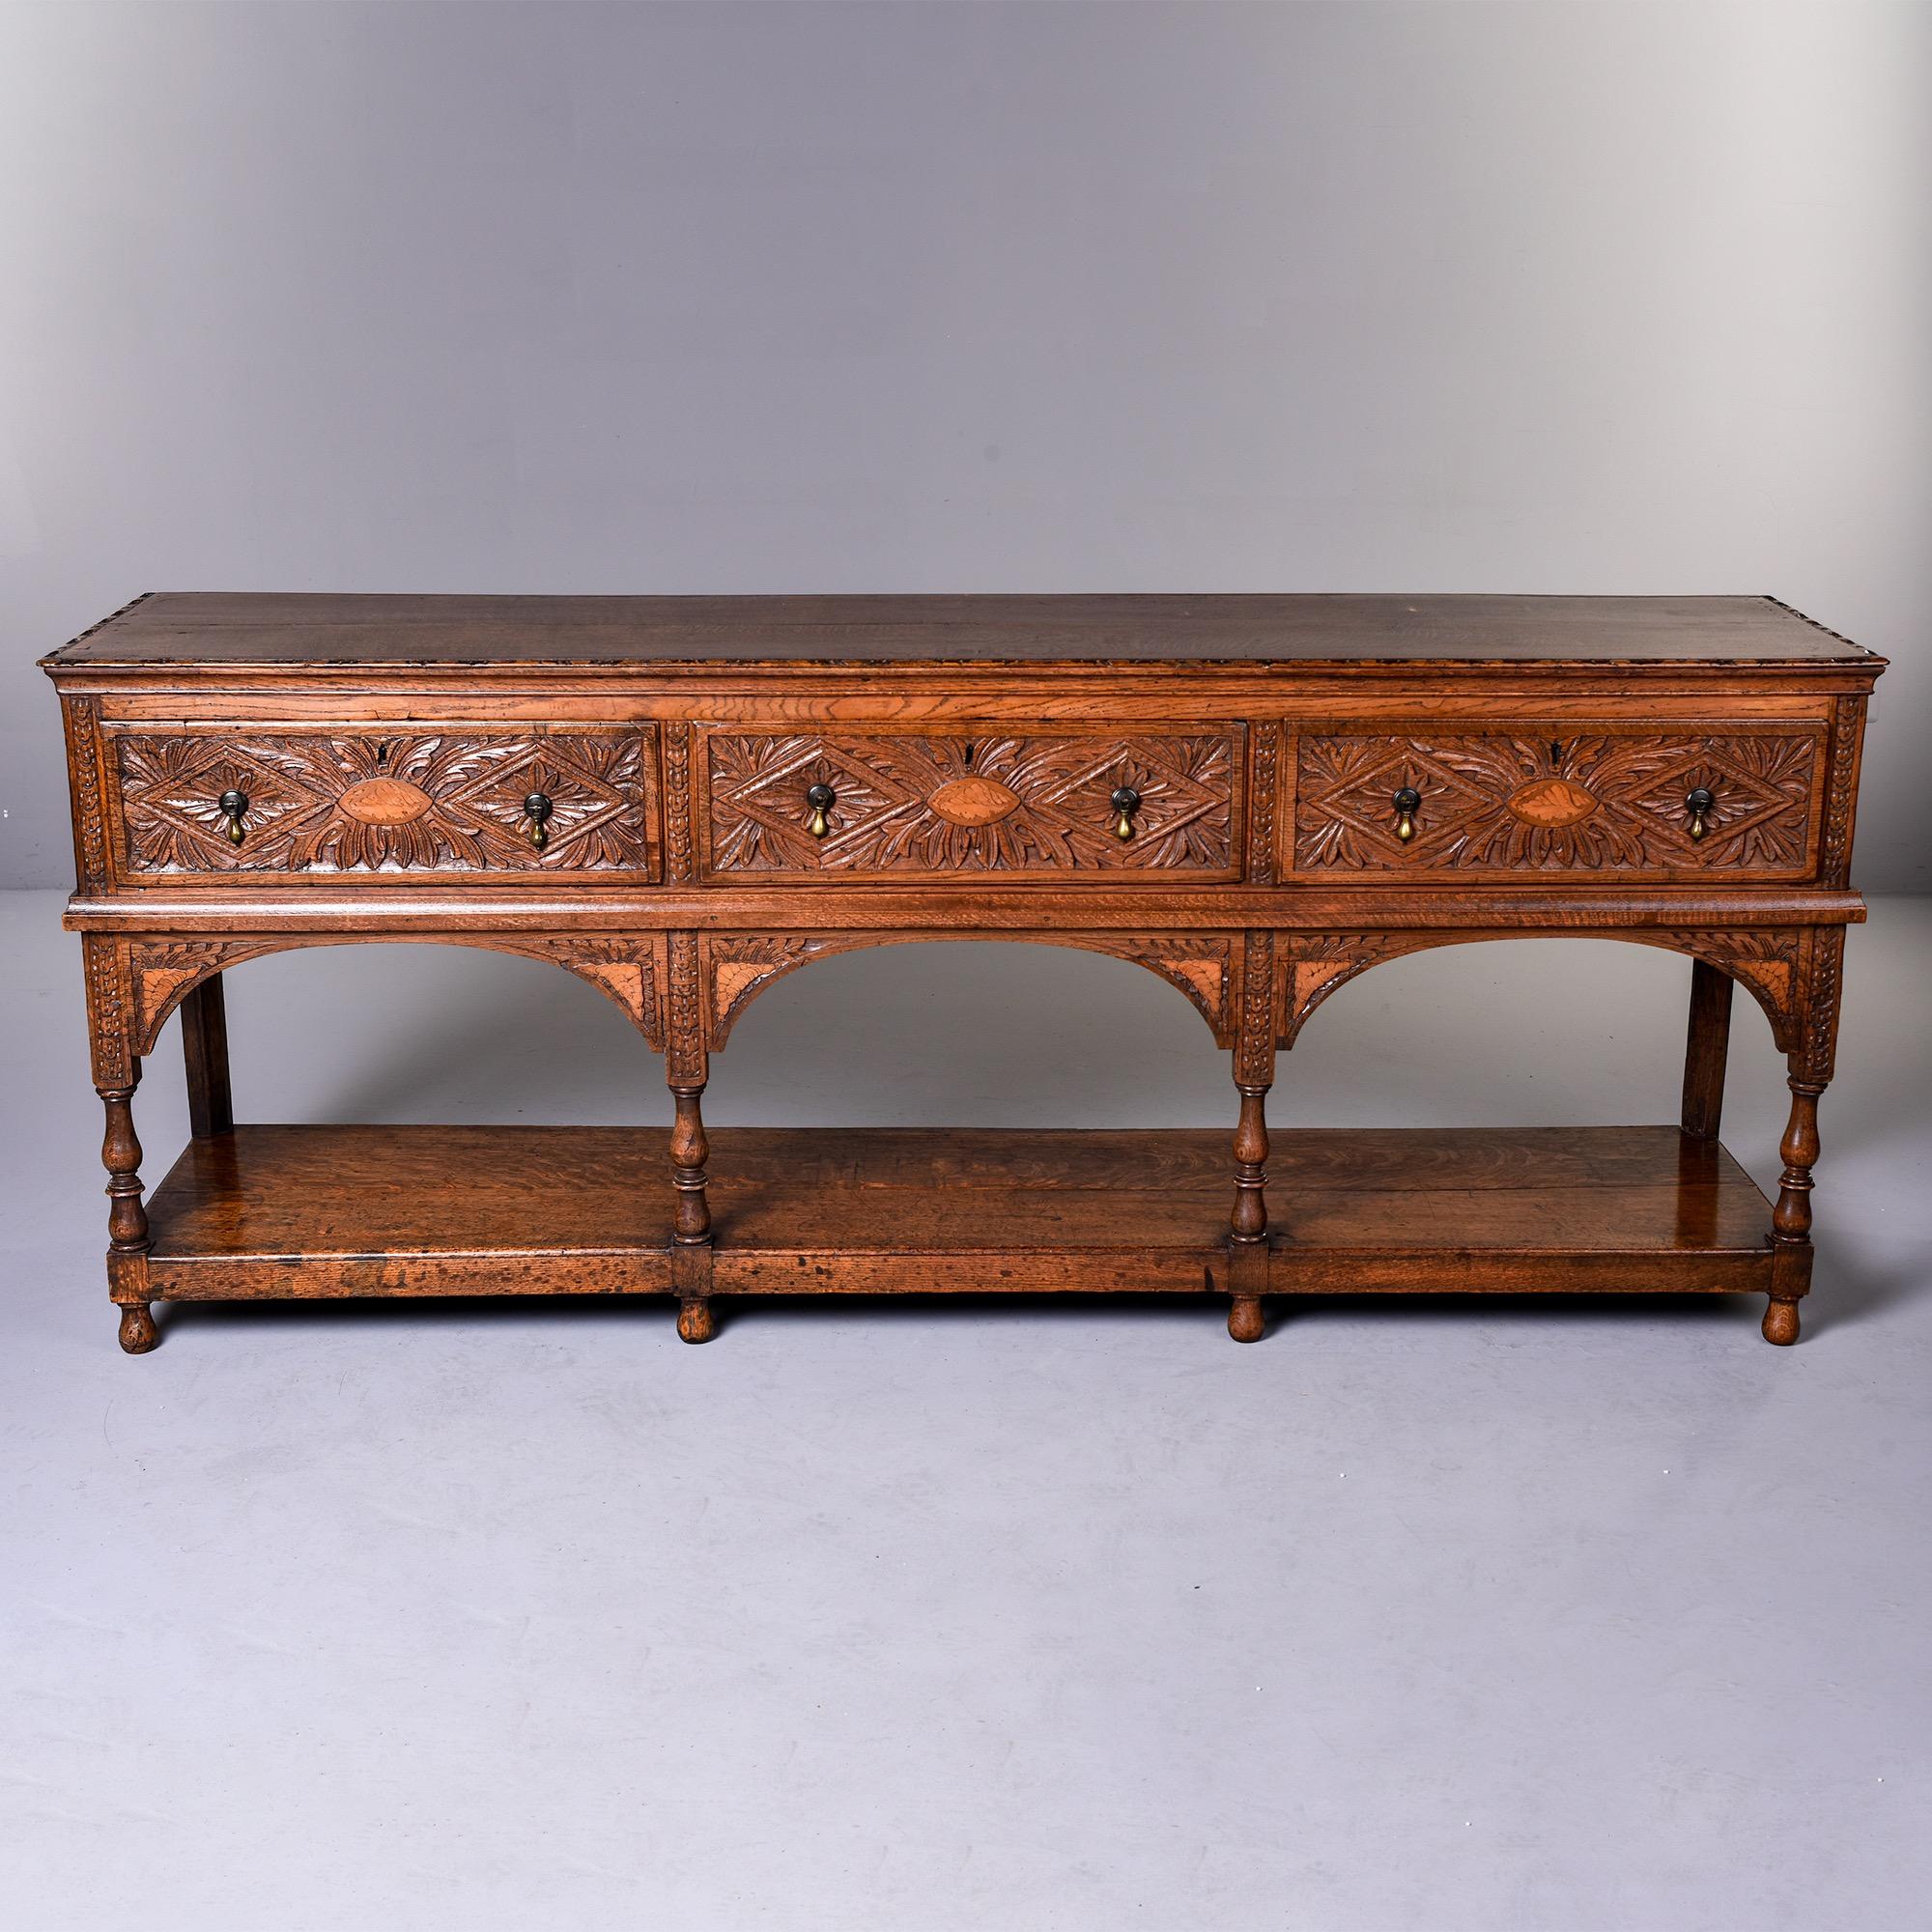 Circa 1880s Welsh oak dresser base with detailed carving makes a great console. Three functional drawers with dovetail construction, botanical / leaf form chip carved fronts with a fancy whelk type shell rendered in contrasting inlay at the center